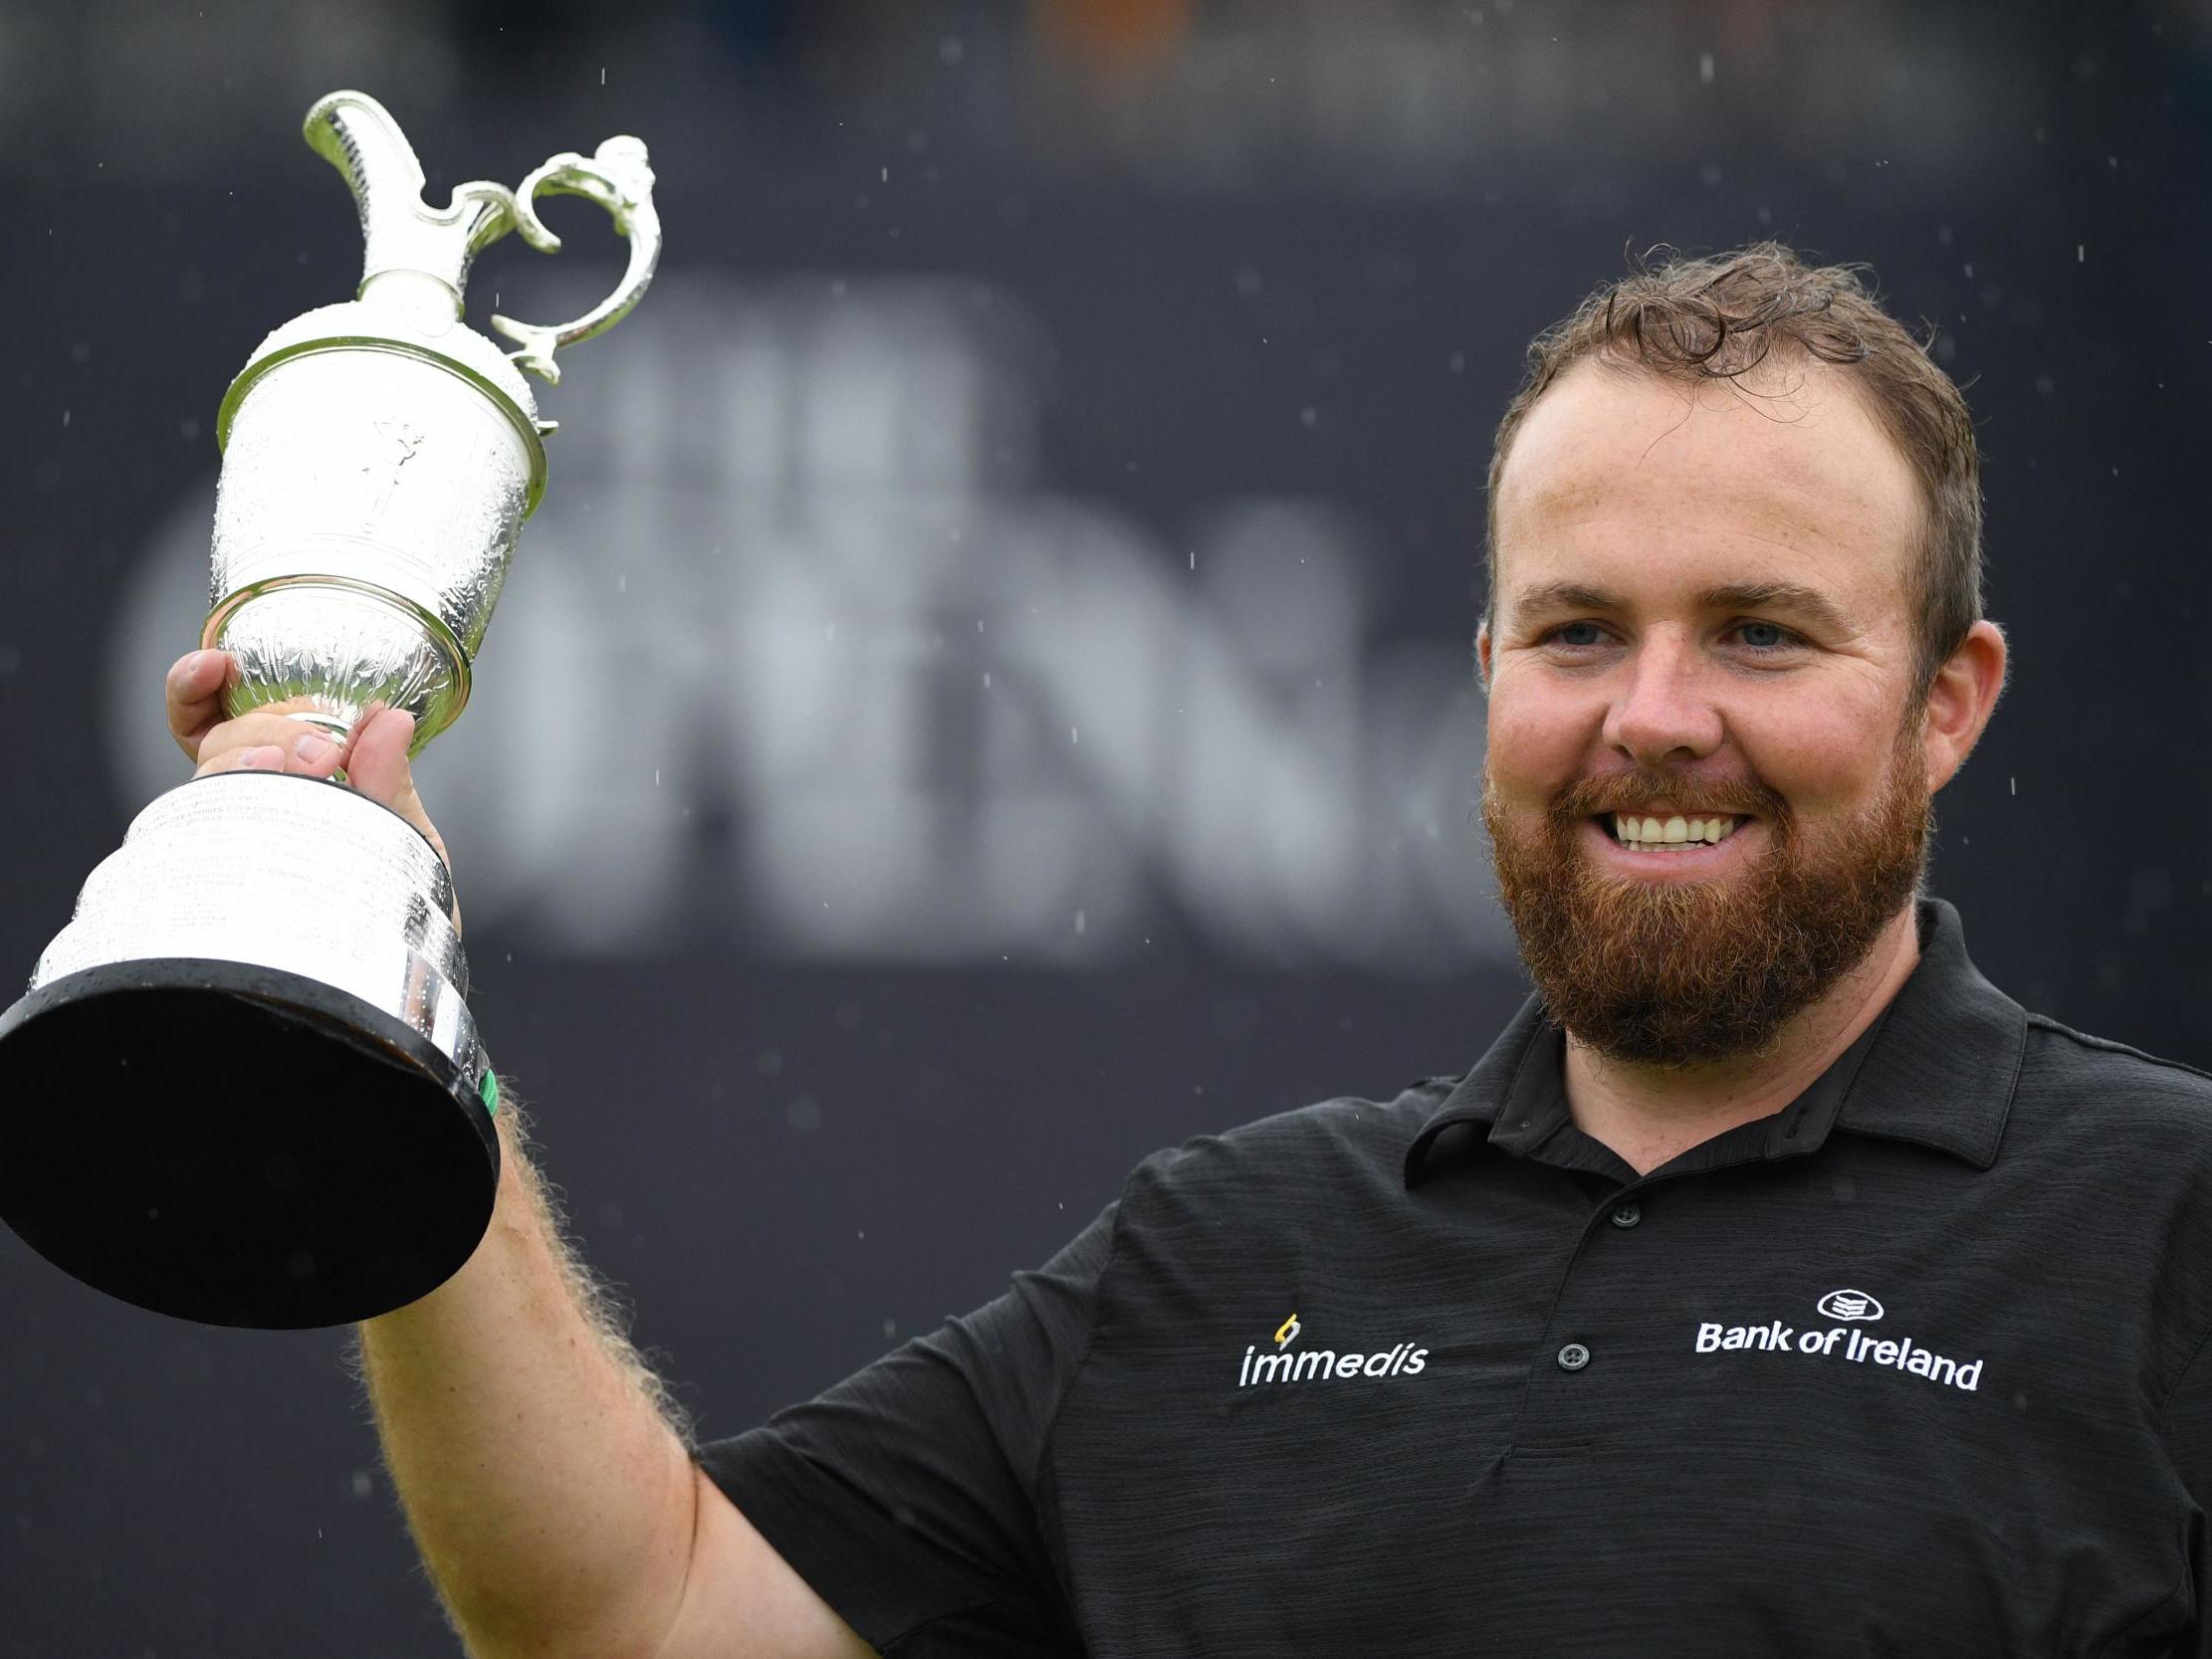 Shane Lowry lifts the Claret Jug